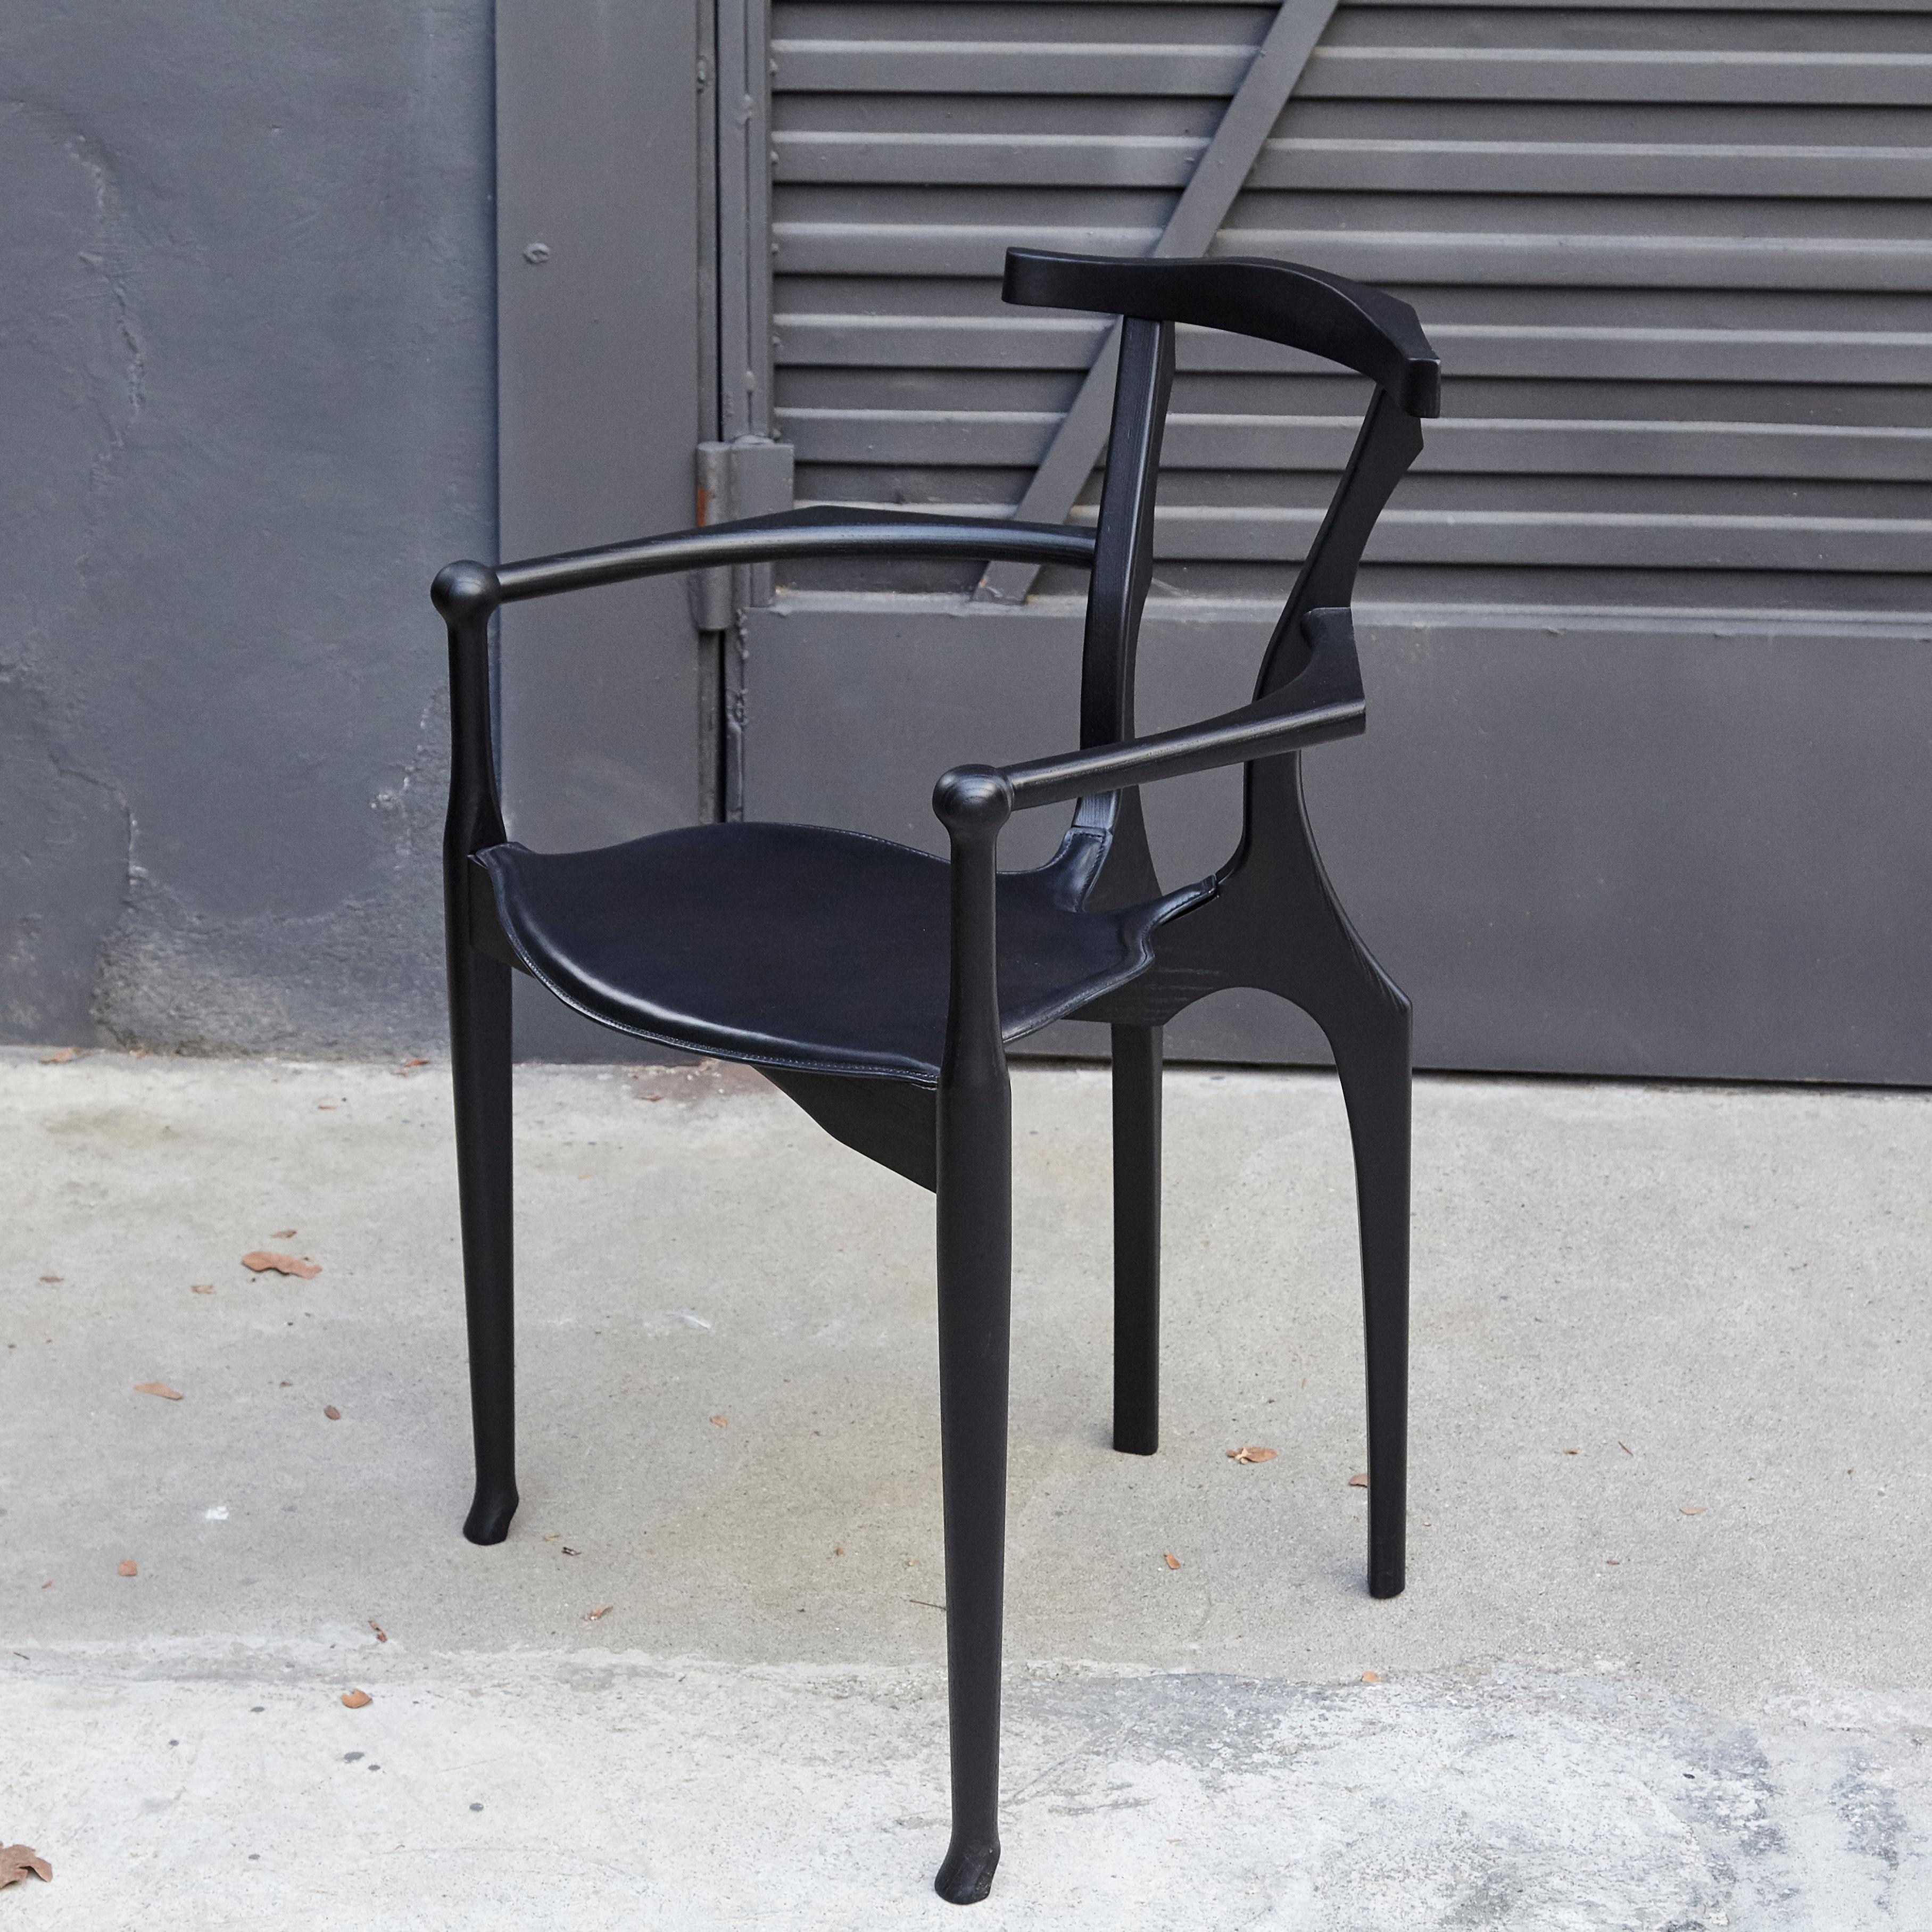 Design by Oscar Tusquets
Manufactured by BD Barcelona.

Solid ash lacquered in black. Seat with internal frame in oak and upholstered in leather.

The Gaulino Chair is one of the best designs by Oscar Tusquets. The chair is made integrally from